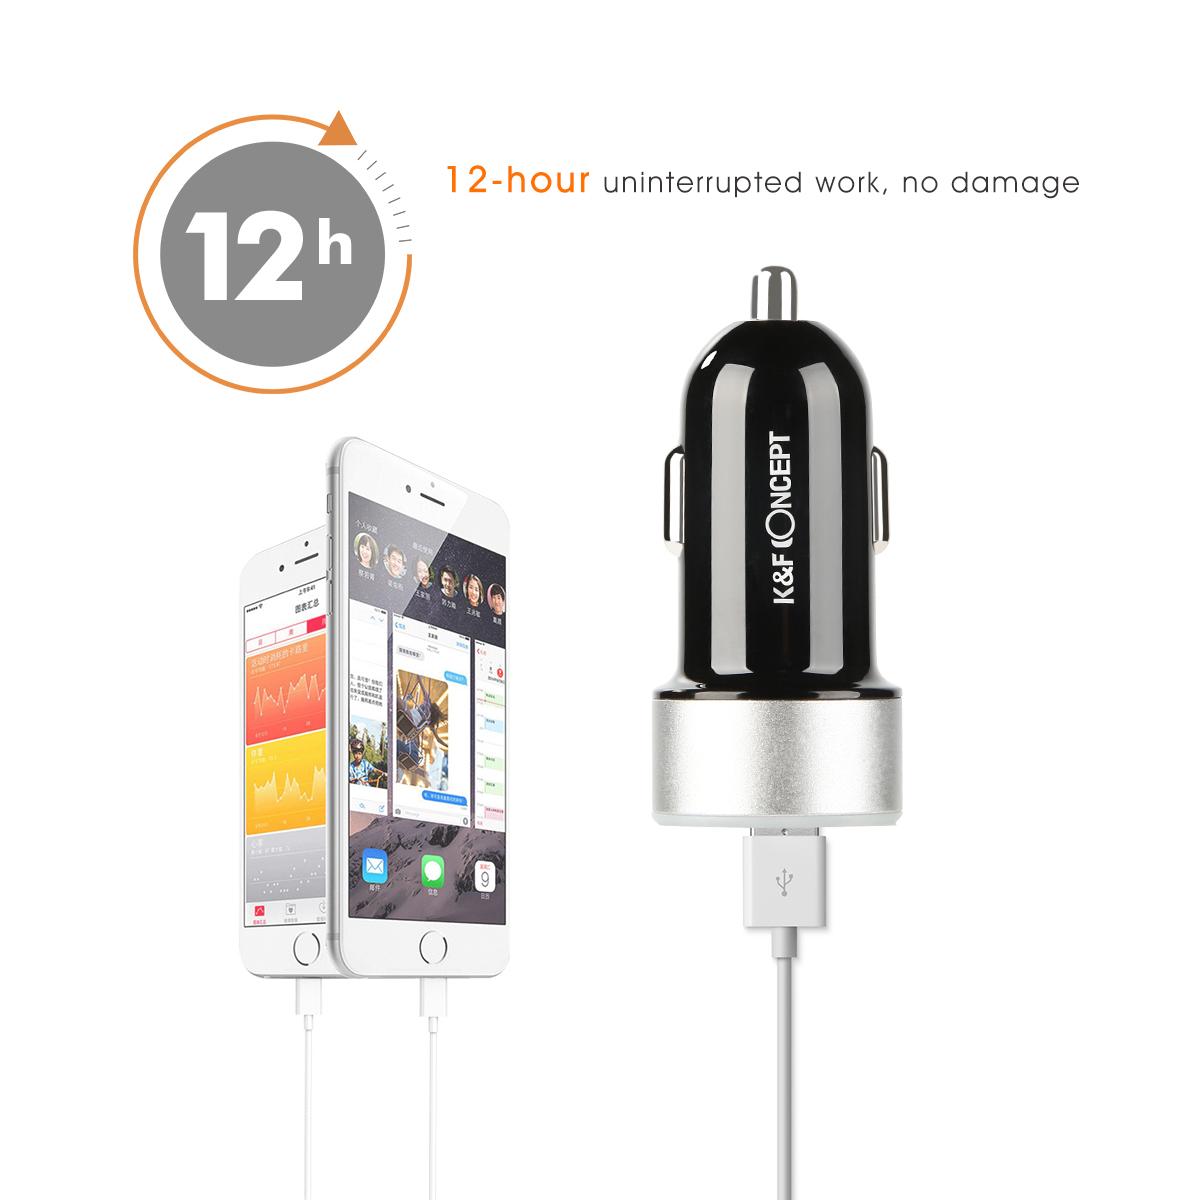 Beschoi USB Car Charger (2 Port Type 2.1A) Super Quick Charge Compatible